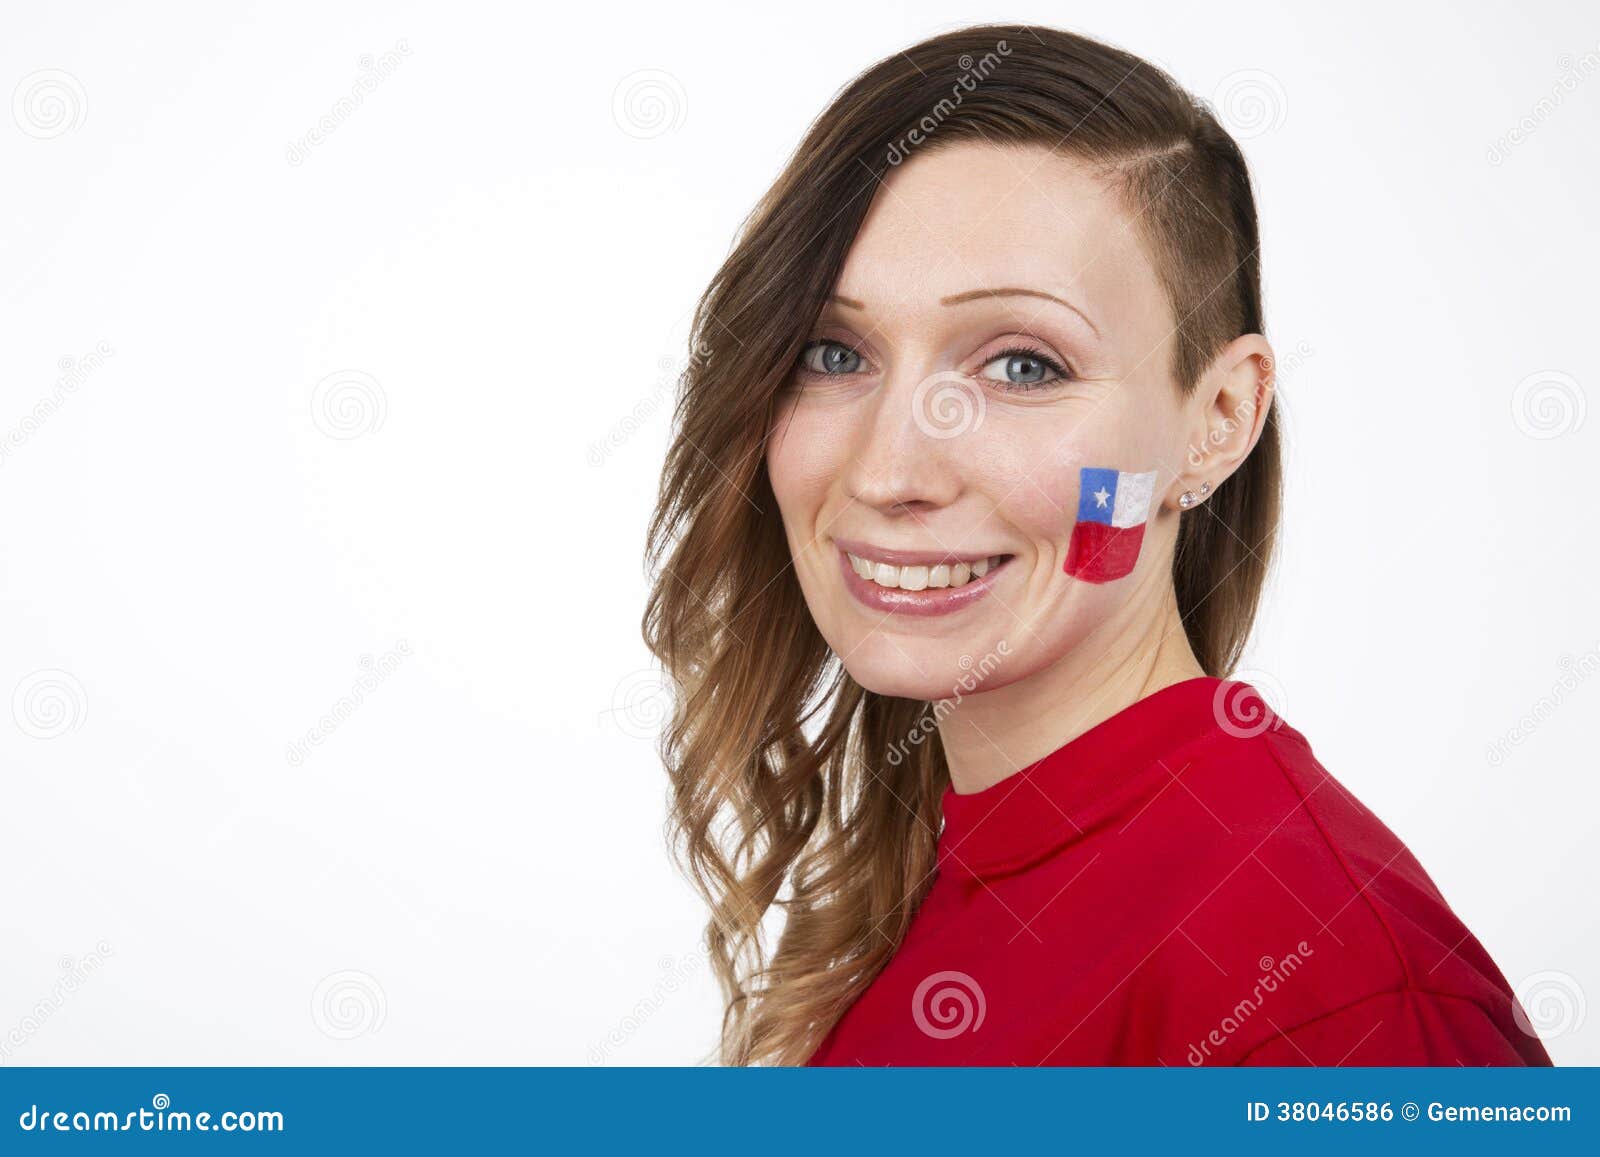 Chilean Girl Royalty Free Stock Image  Image: 38046586